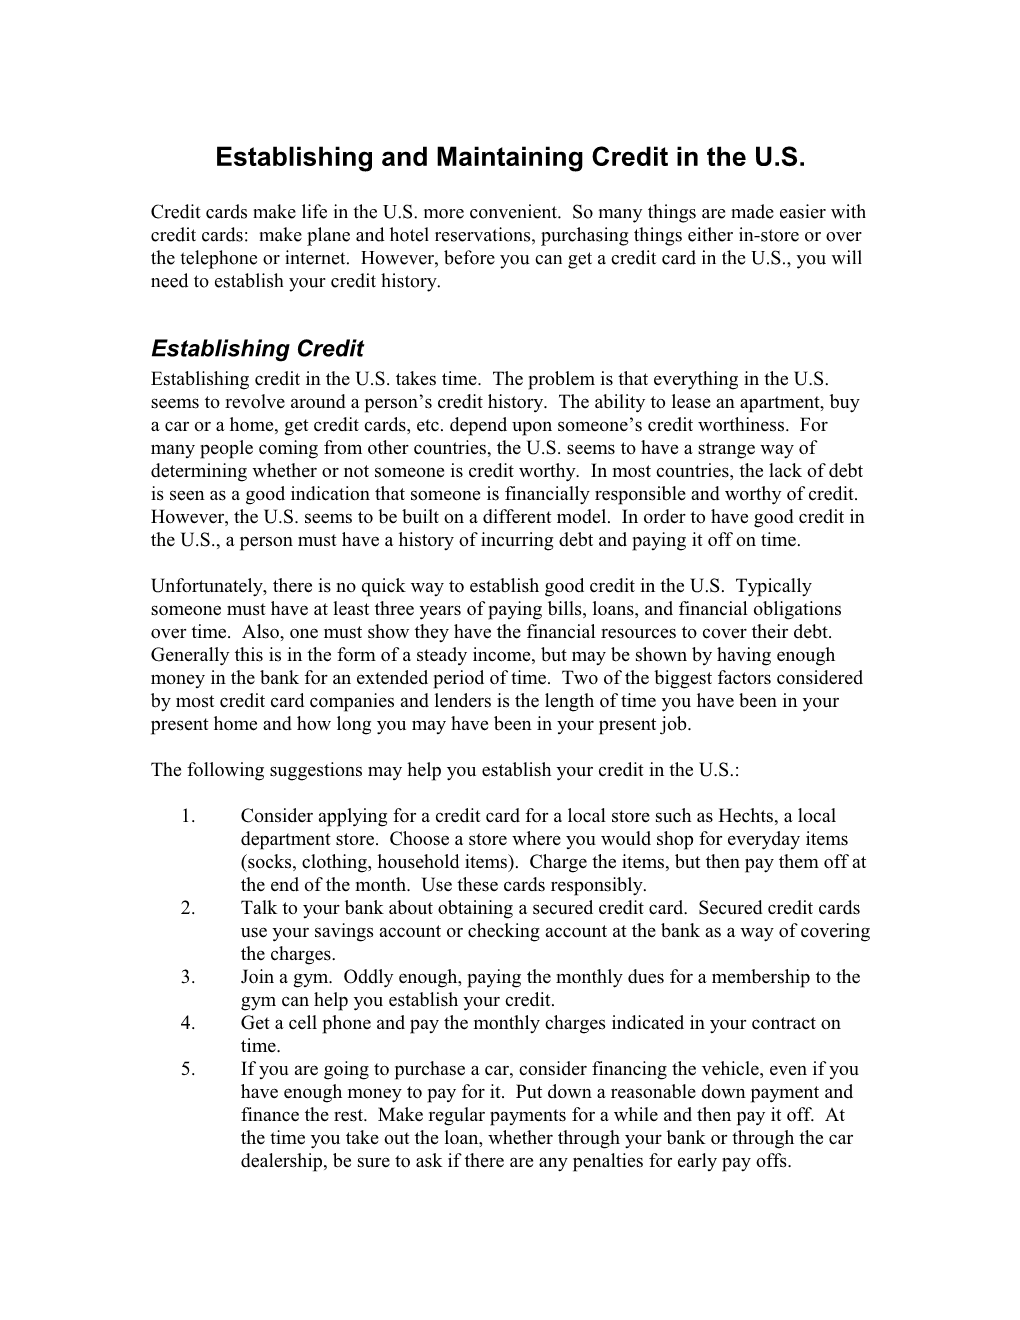 Establishing and Maintaining Credit in the U